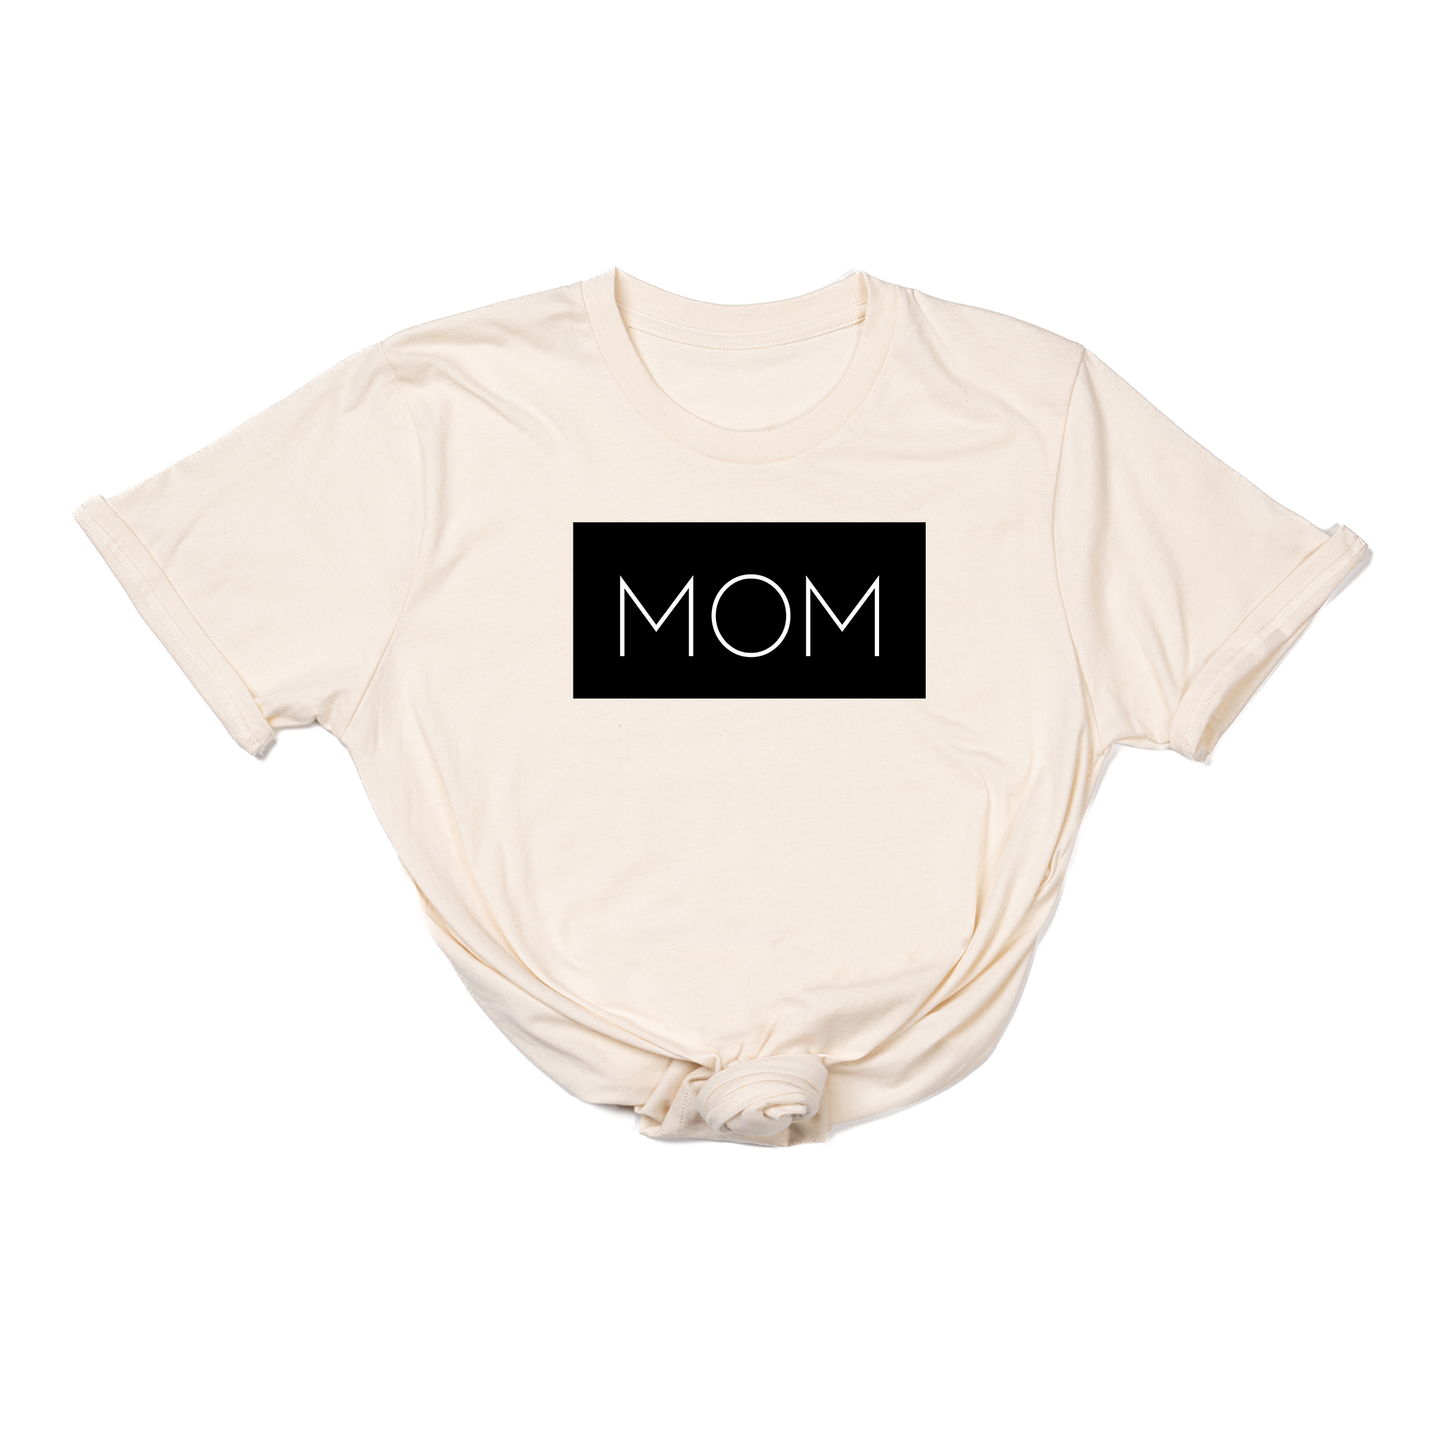 Mom (Boxed Collection, Black Box/White Text, Across Front) - Tee (Natural)